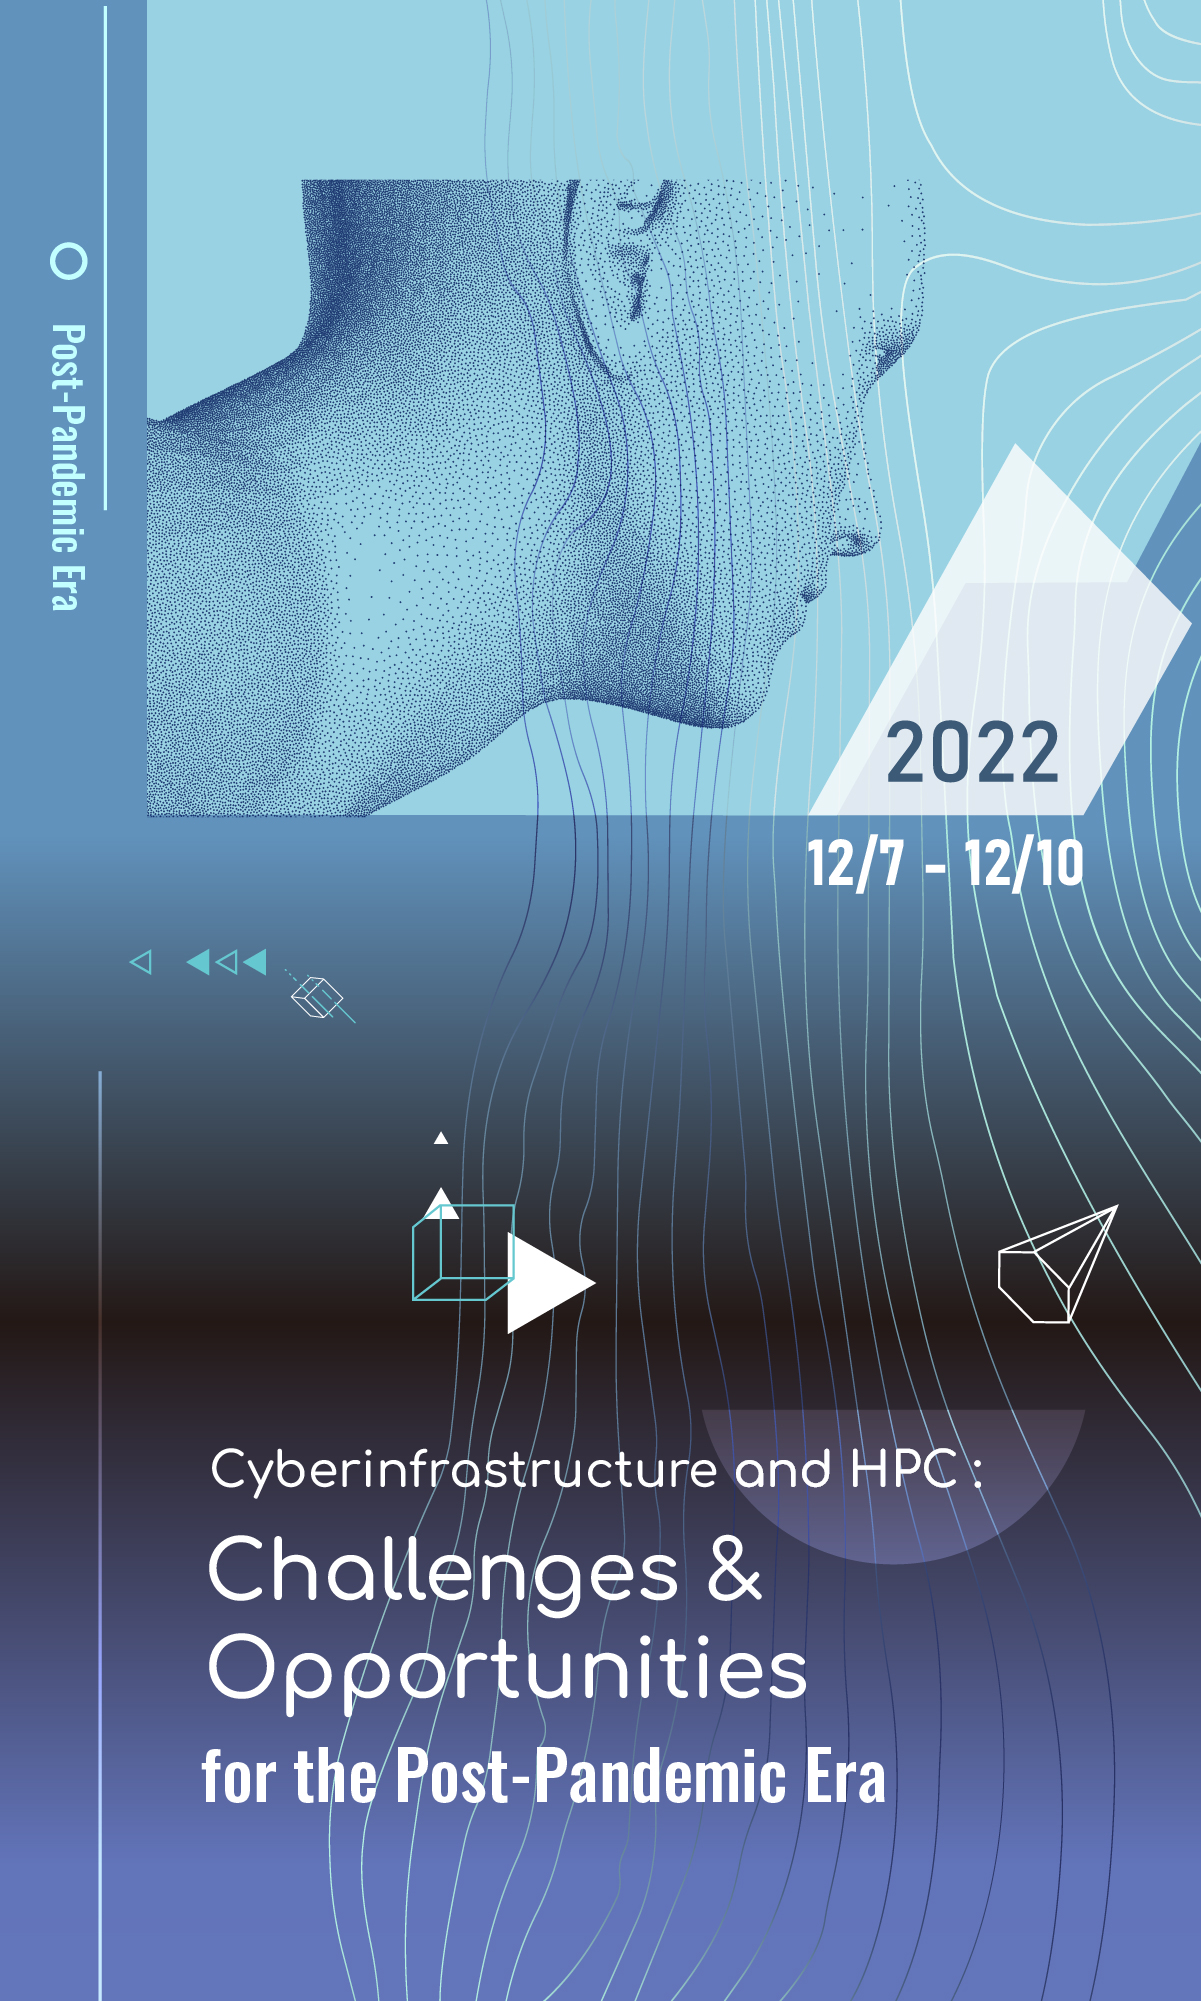 Cyberinfrastructure and HPC : Challenges & Opportunities for the Post-Pandemic Era